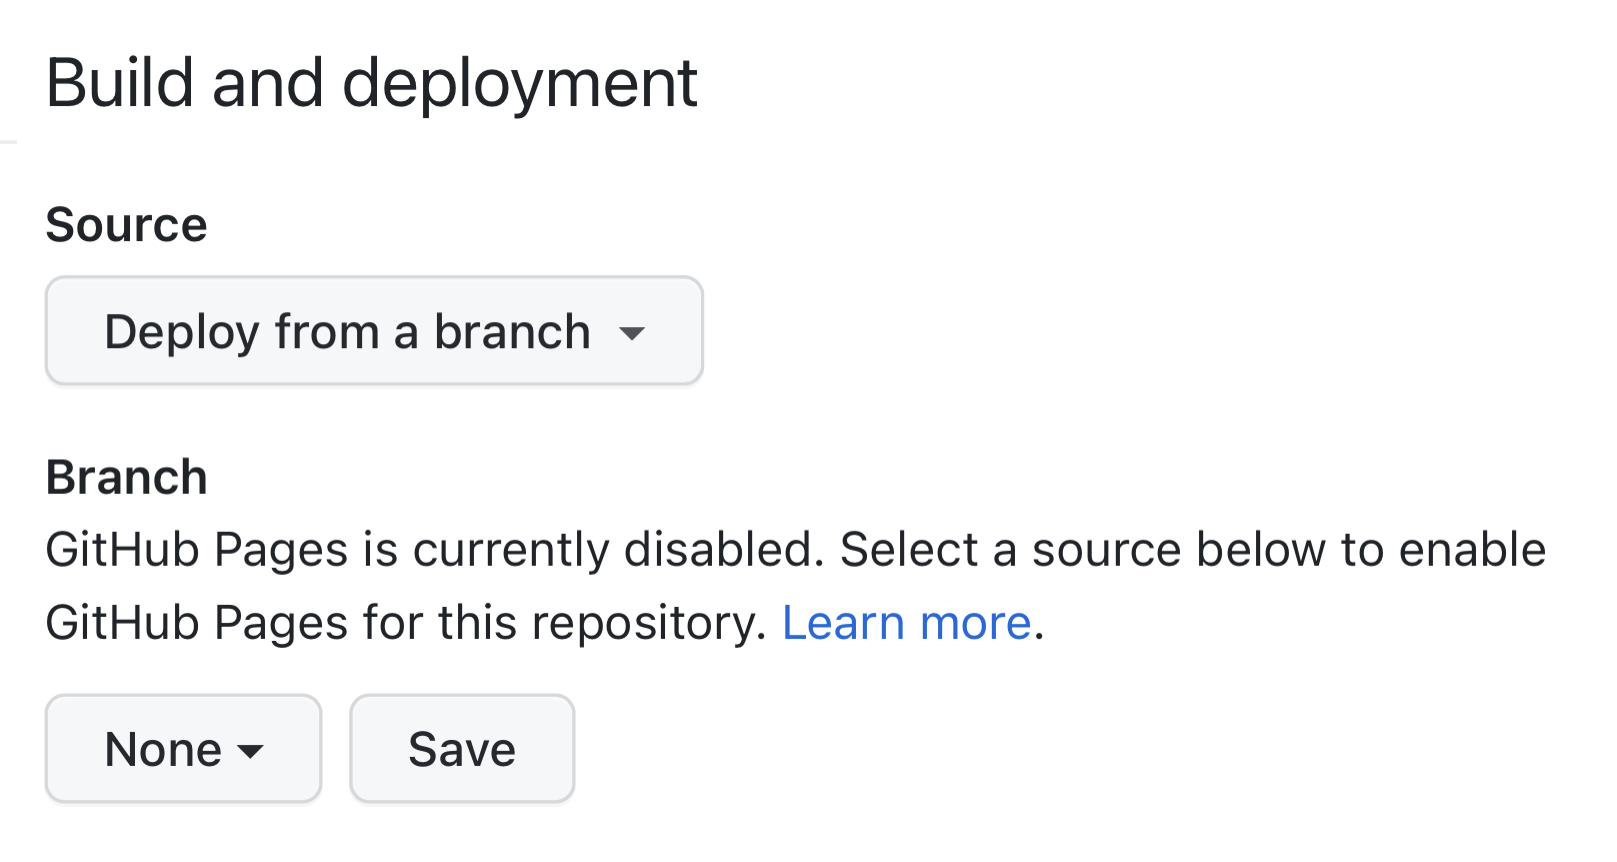 Build and deployment: Source: Deploy from a branch GitHub Pages is currently disabled. Select a source below to enable GitHub Pages for this repository. Save button.